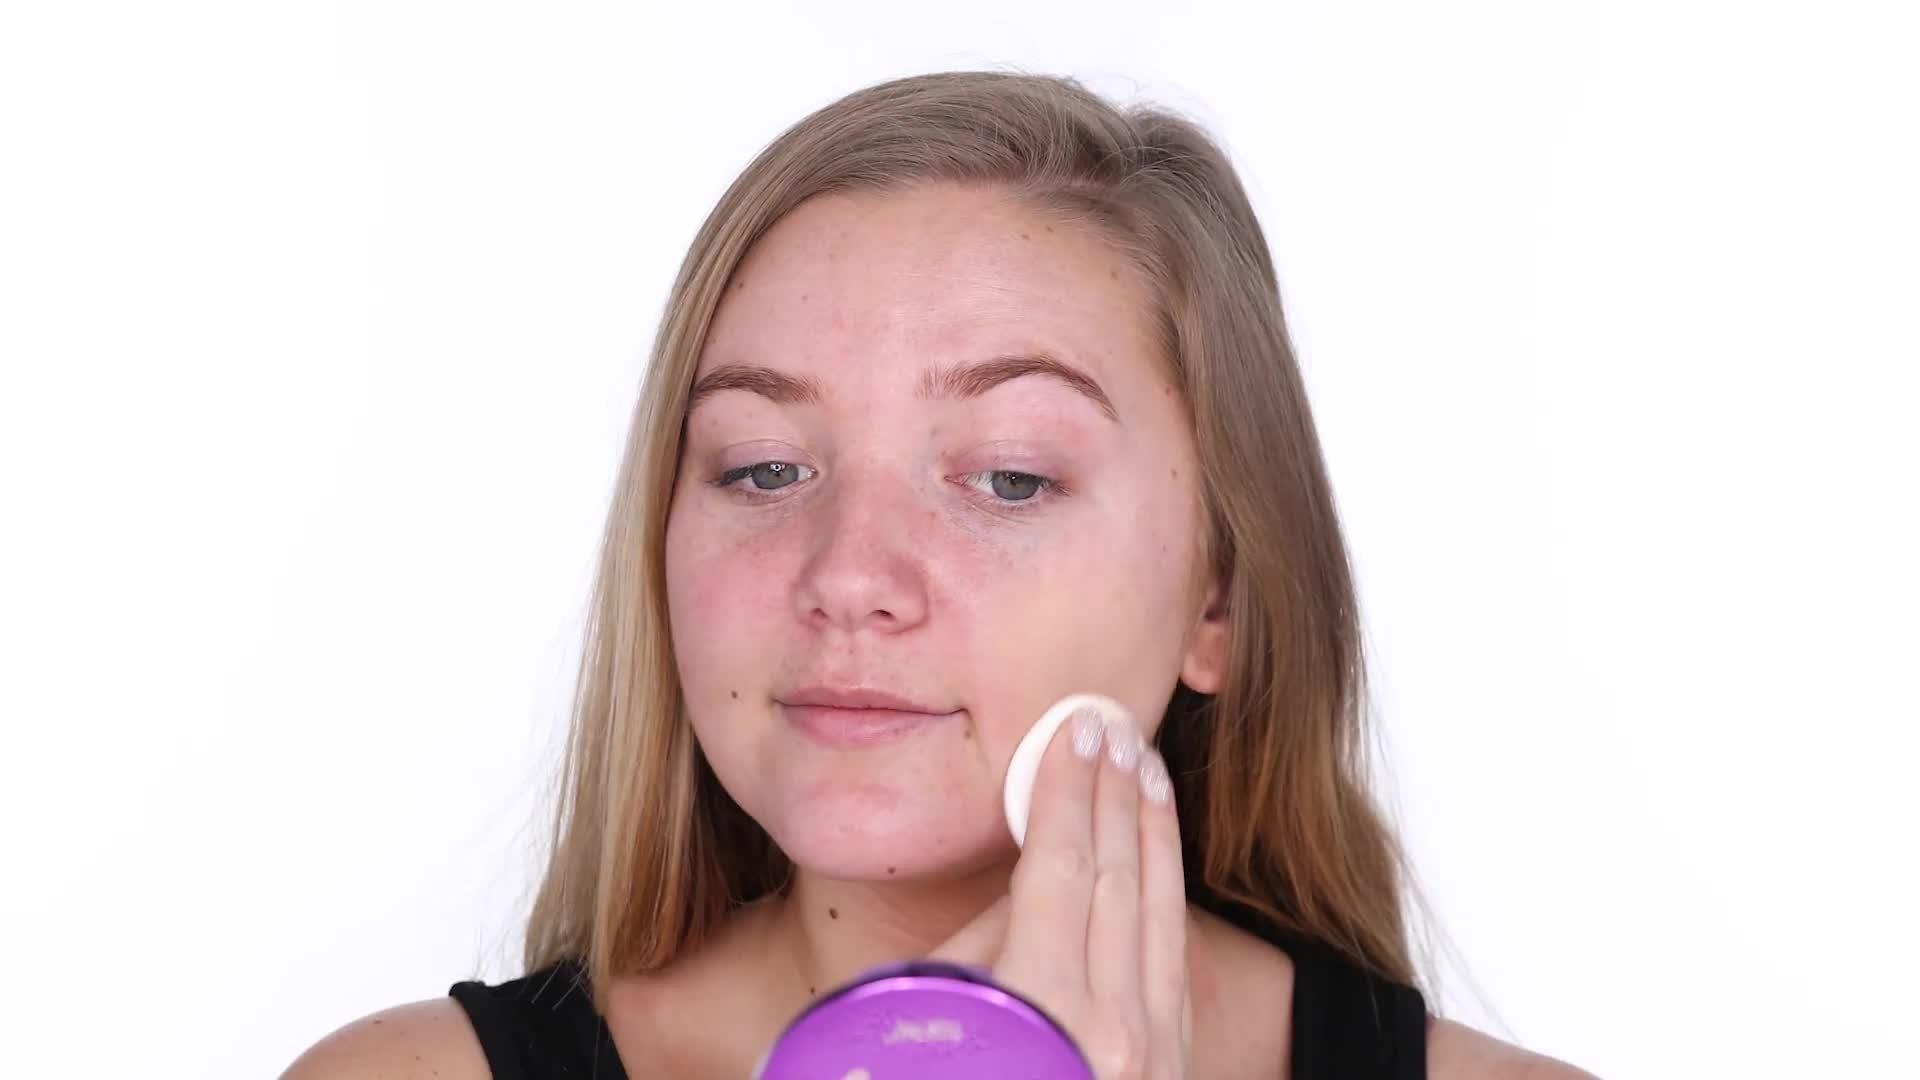 Tarte Shape Tape Cloud Foundation SPF 15, Beauty & Personal Care, Face,  Makeup on Carousell